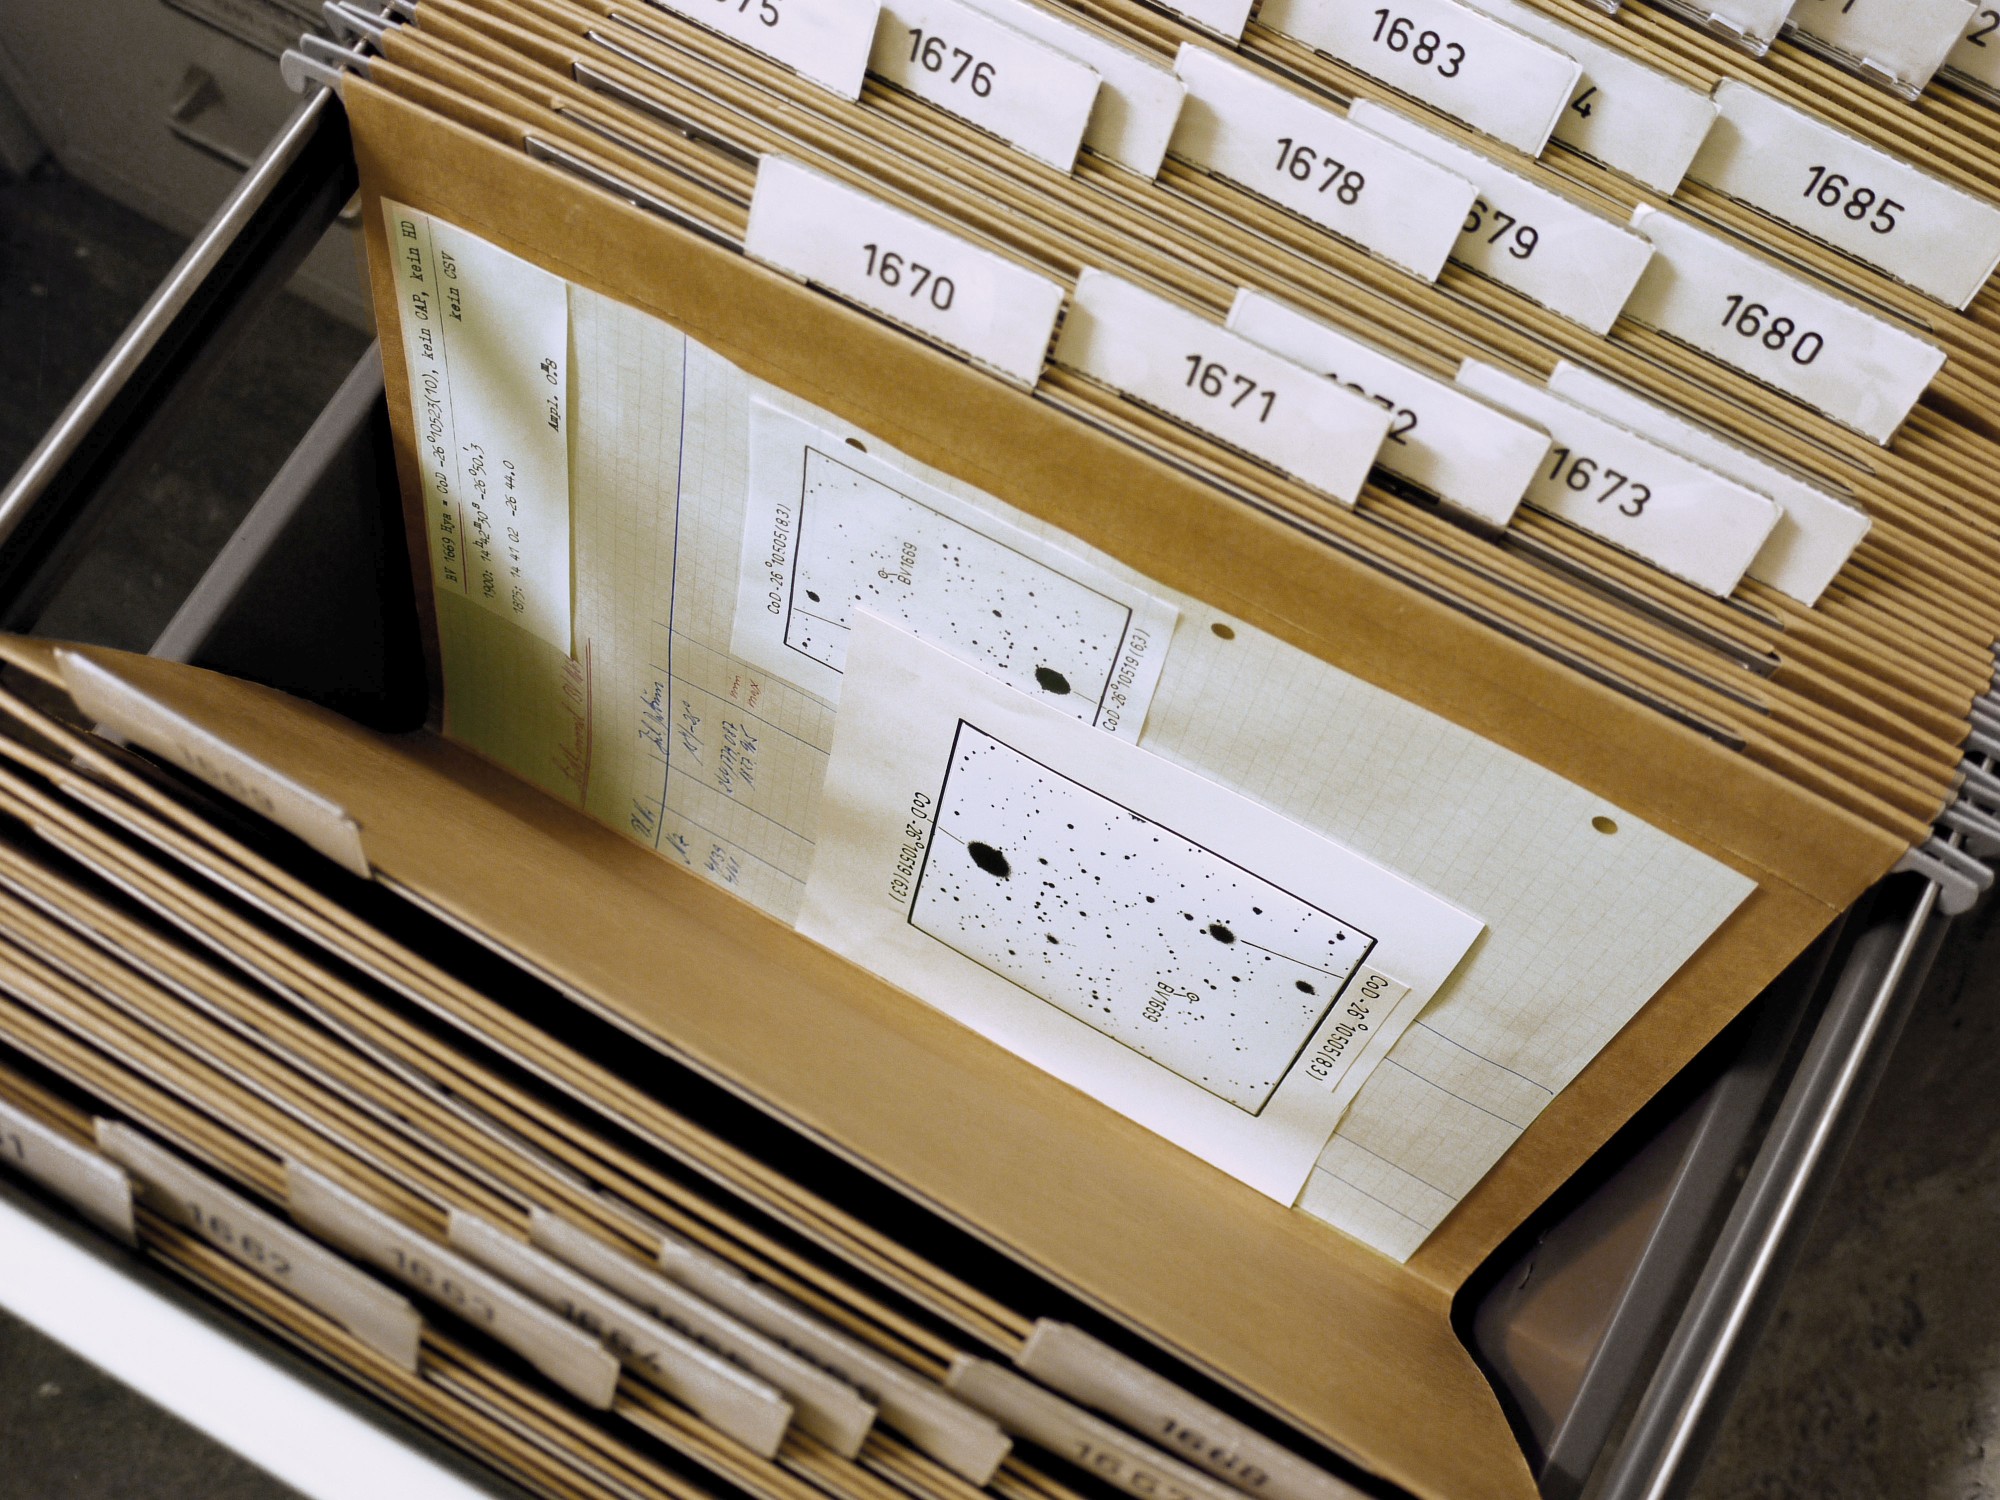 Files containing astronomical slides in the slide collection (Image: Isi Kunath)